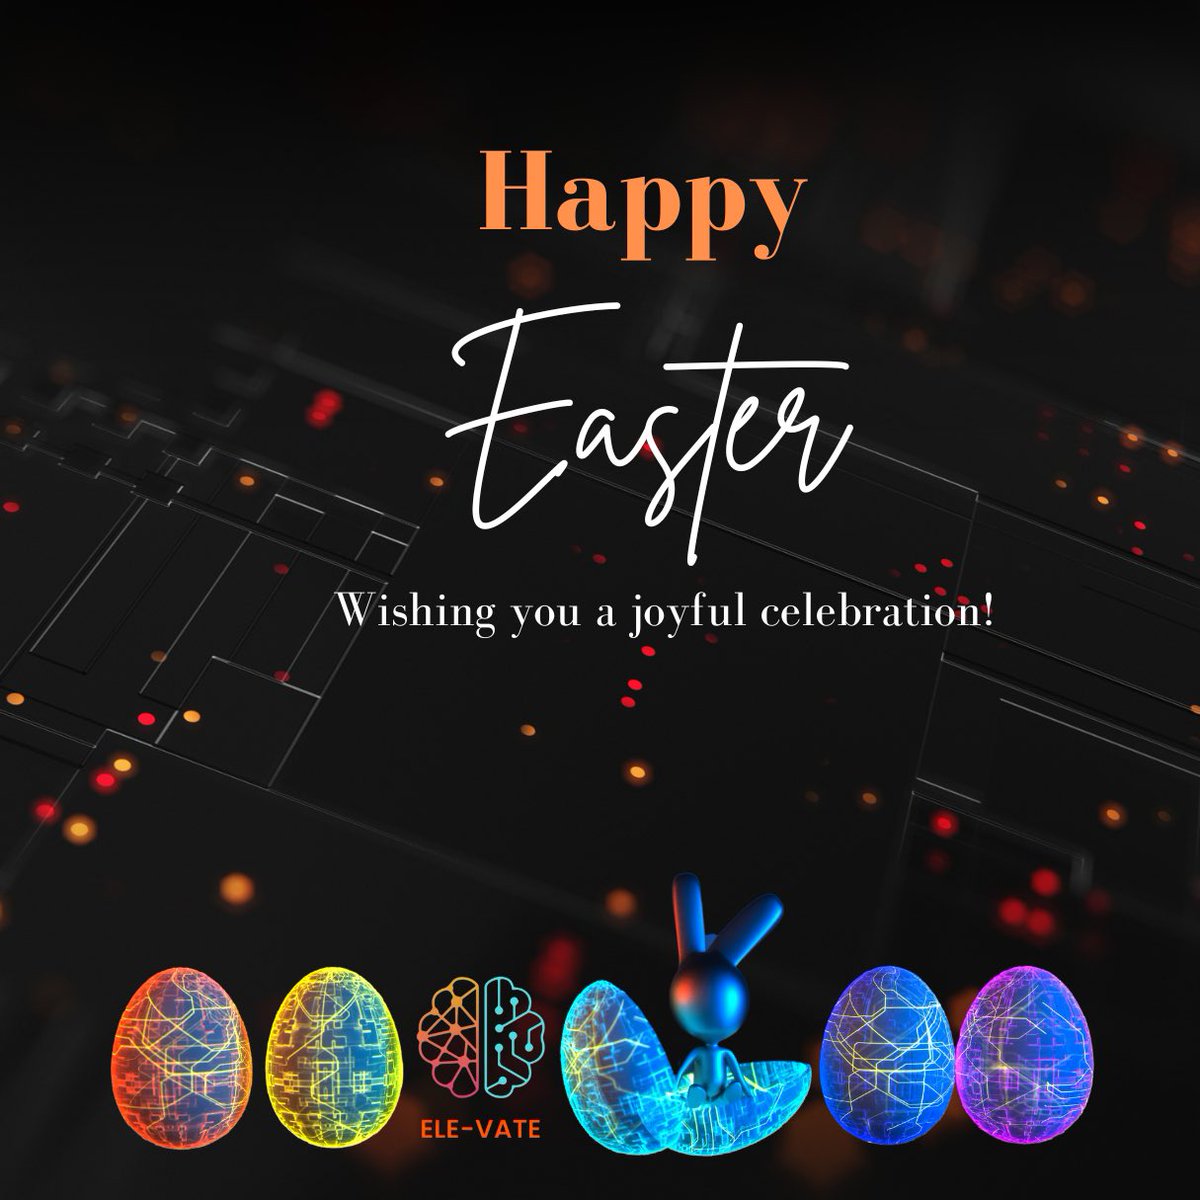 Wishing a joyous Easter to our valued partners, community members, cherished clients, and all who celebrate this special holiday!🎉🤖

#AIforAfrica #TechNews #InclusiveDevelopment #TheAfricaWeWant #Agenda2063 #SustainableDevelopment #AfricanOpportunities #TechTrends2024 #Edutech